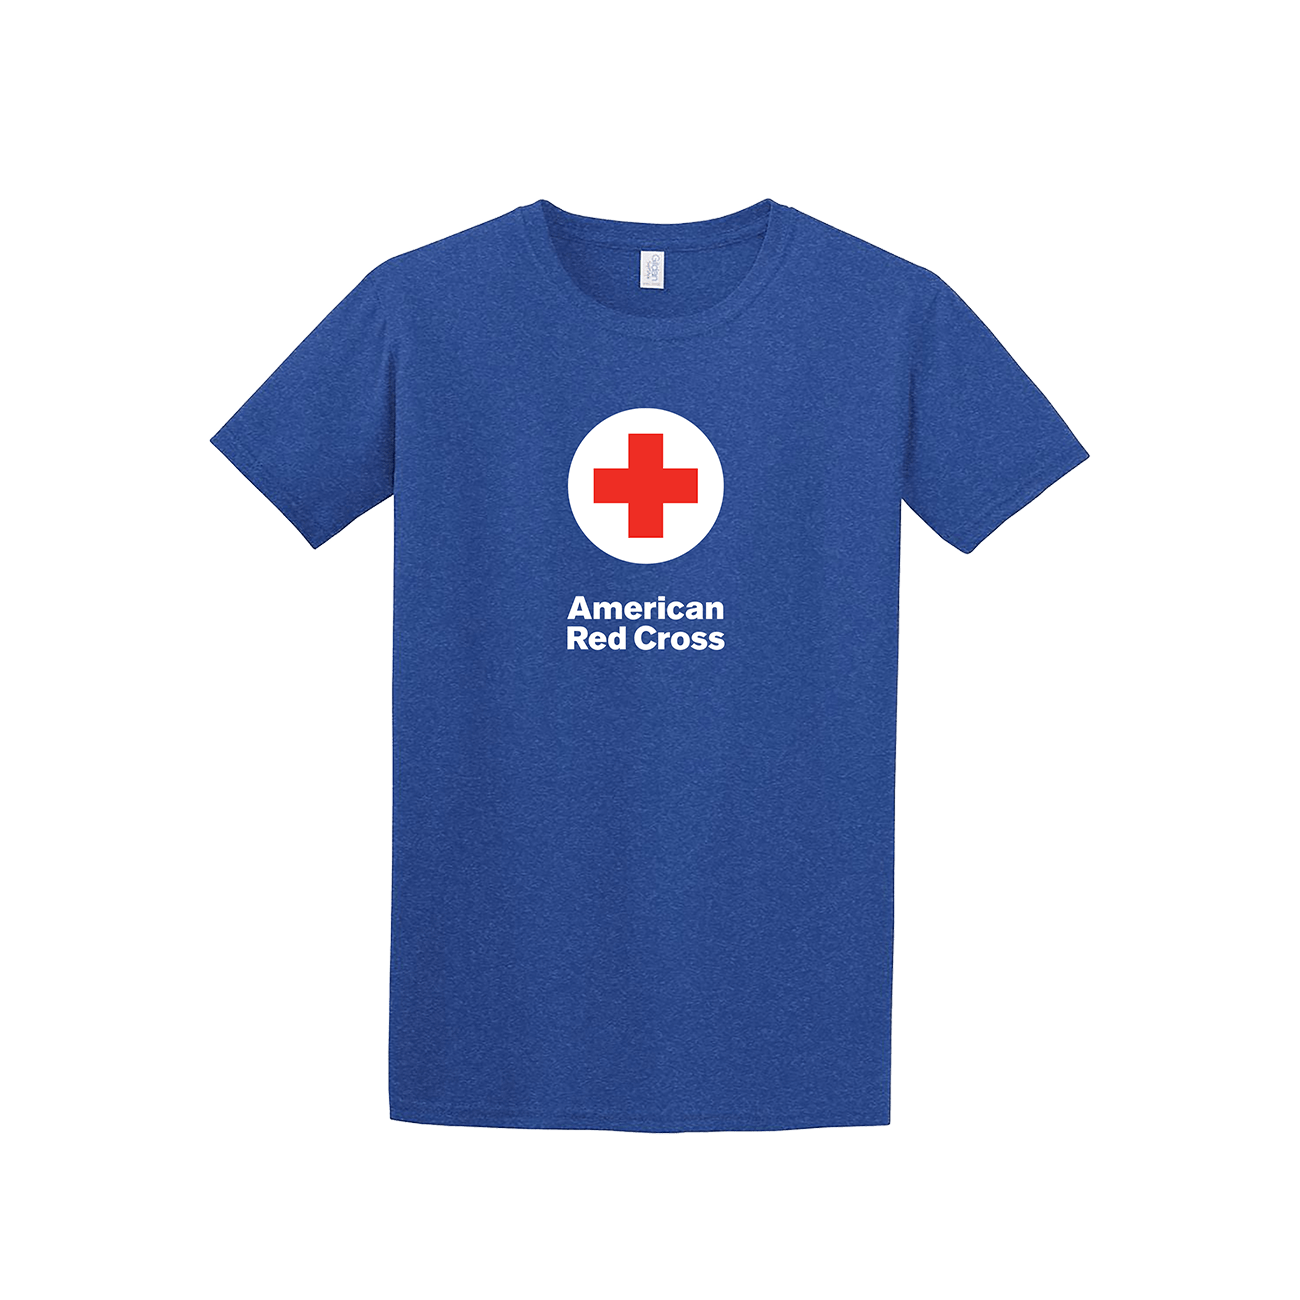 Blue and Red Cross Logo - Unisex 100% Cotton T-Shirt with ARC Logo | Red Cross Store